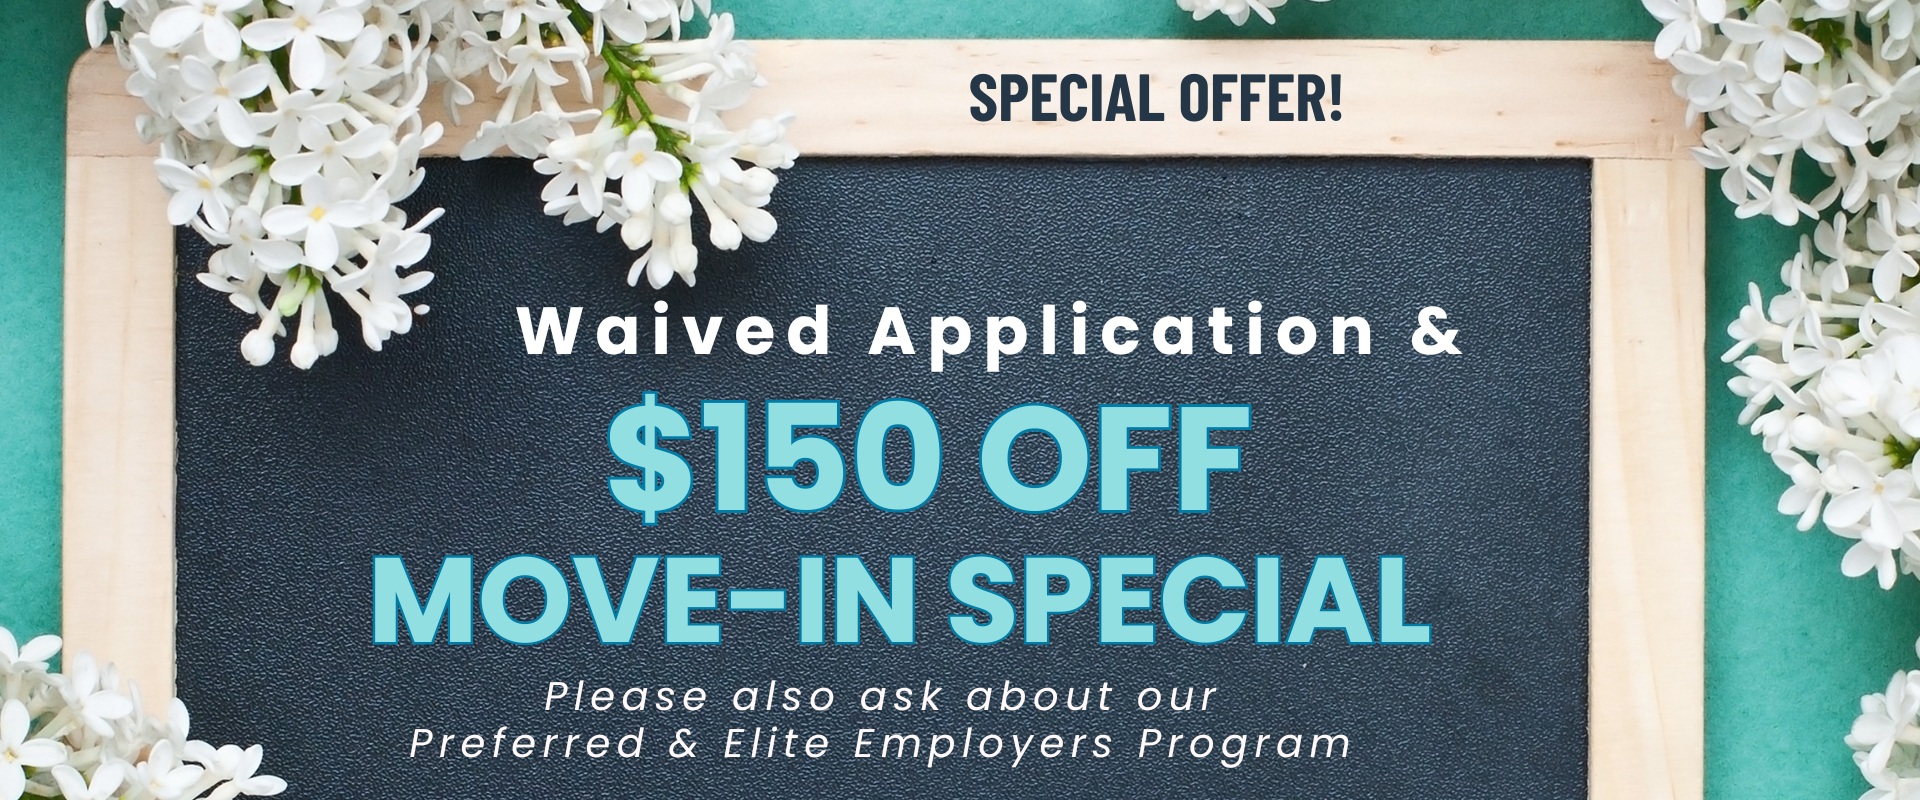 Waived Application and $150.00 Off Move-In Special Please also ask about our Preferred & Elite Employers Program